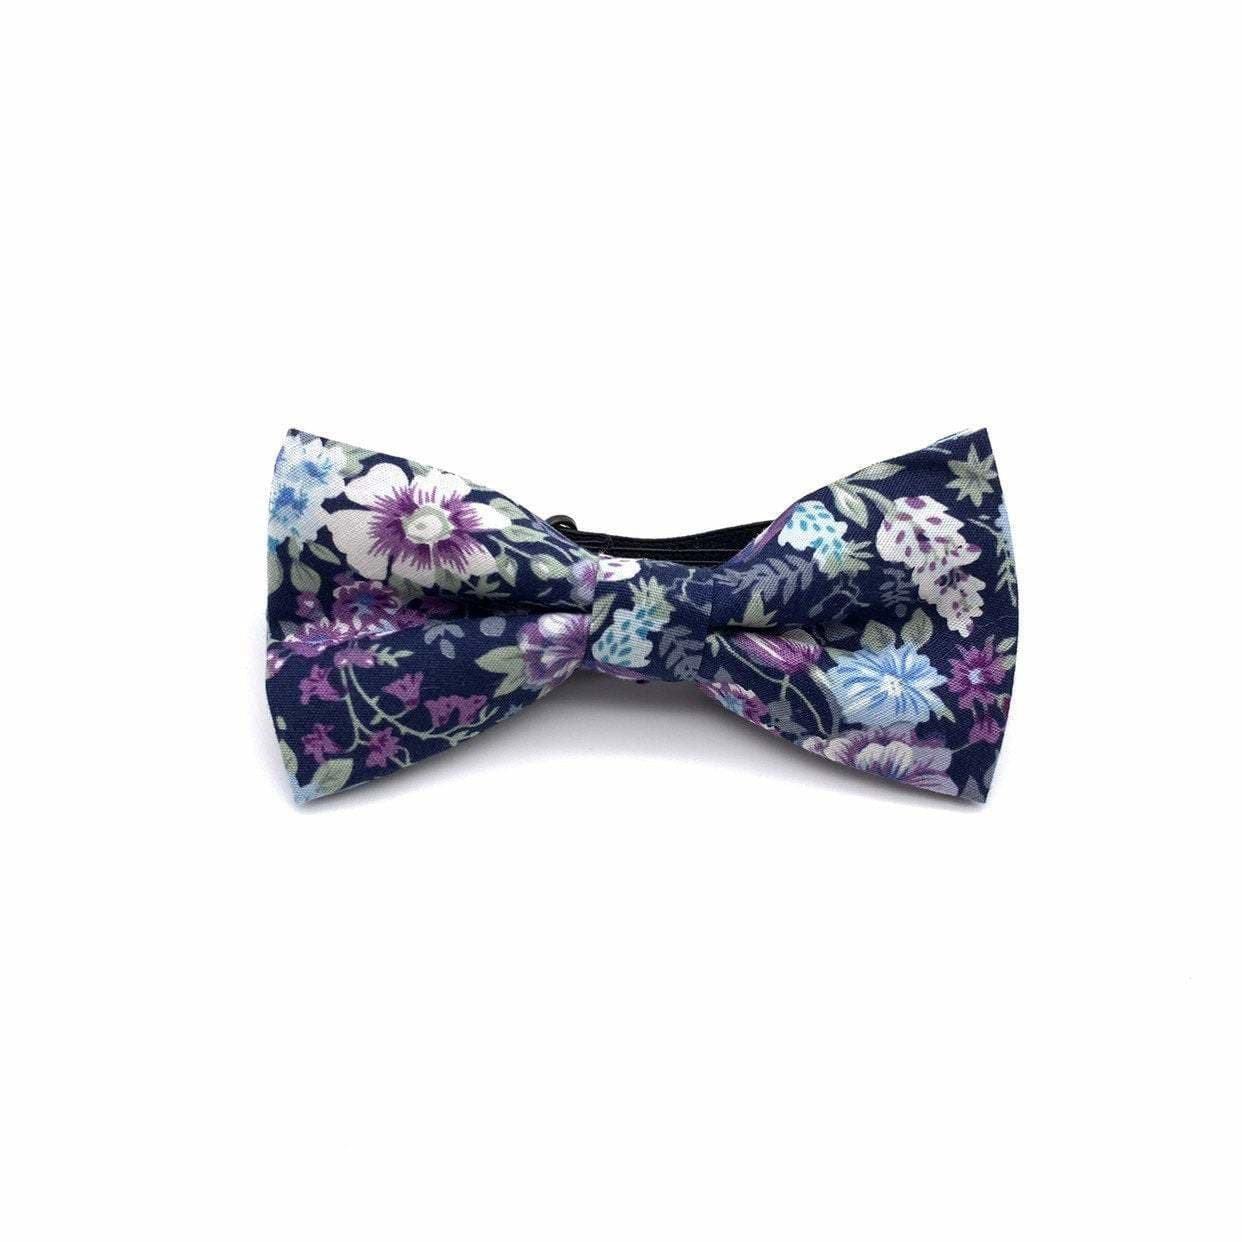 Purple and Blue Kids Floral Pre-Tied Bow Tie Mytieshop - SWEET PEA-Kids' Floral Bow tie SWEET PEA Color: Blue Base Strap is adjustablePre-Tied bowtieBow Tie 10.5 * 6CM Great for Prom Dinners Interviews Photo shoots Photo sessions Dates Wedding Attendant Ring Bearers Fits toddlers and babies. Evabder baby ow tie toddler bow tie floral for wedding and events groom groomsmen flower bow tie mytieshop ring bearer page boy bow tie white bow tie white and blue tie kids bowtie floral Adjustable wedding 